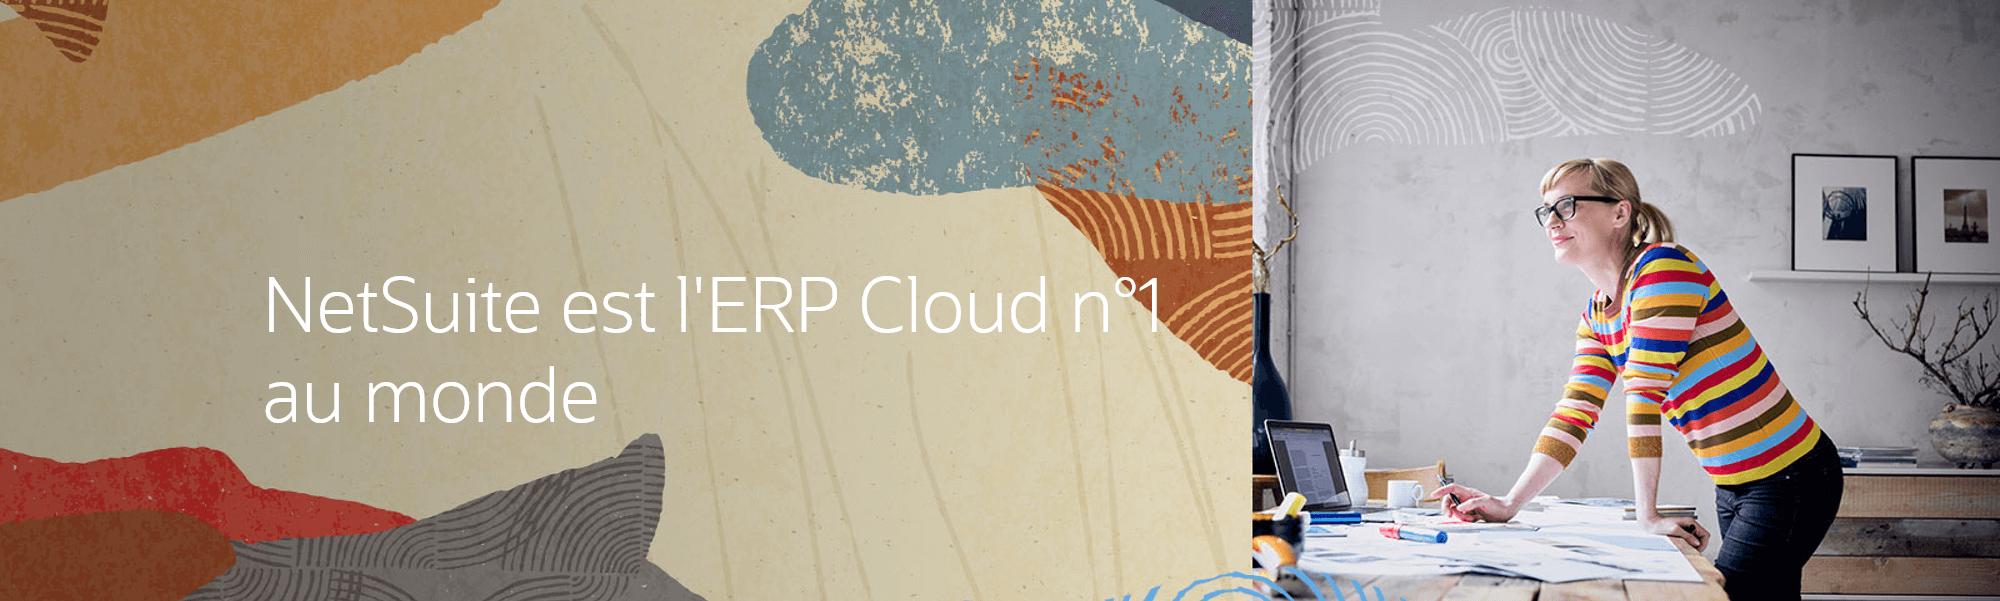 Review NetSuite: The #1 Cloud ERP for implementing your scalability - Appvizer